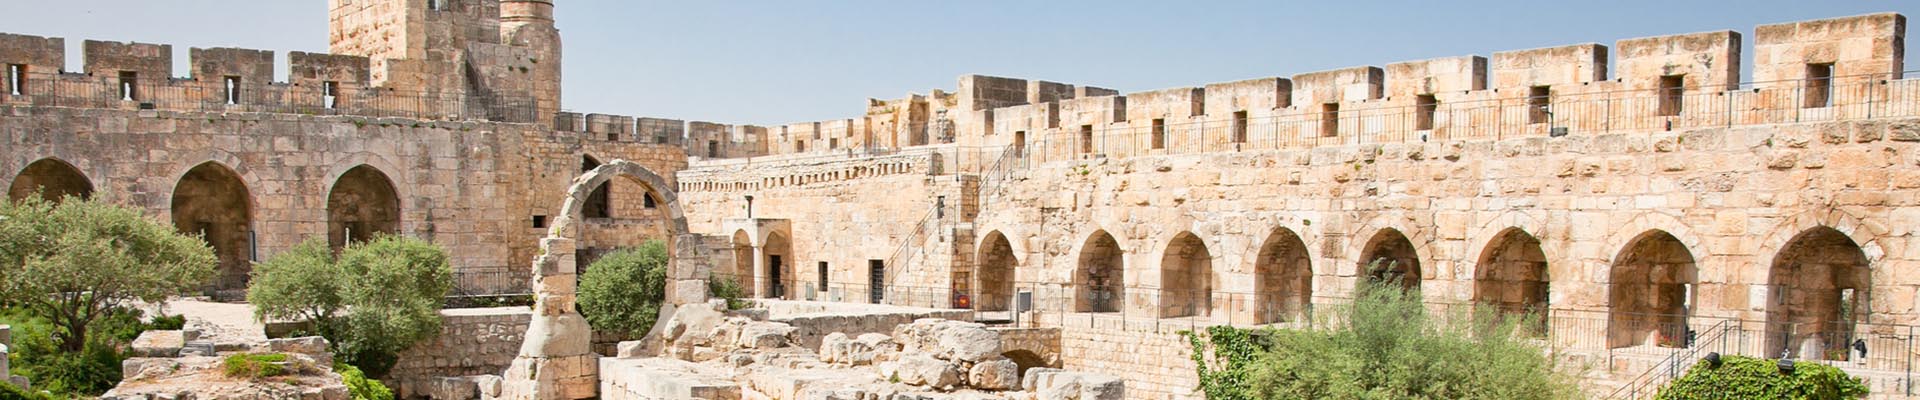 Luxury Small Israel 10 Day Tour with Mystical History of Underground Jerusalem